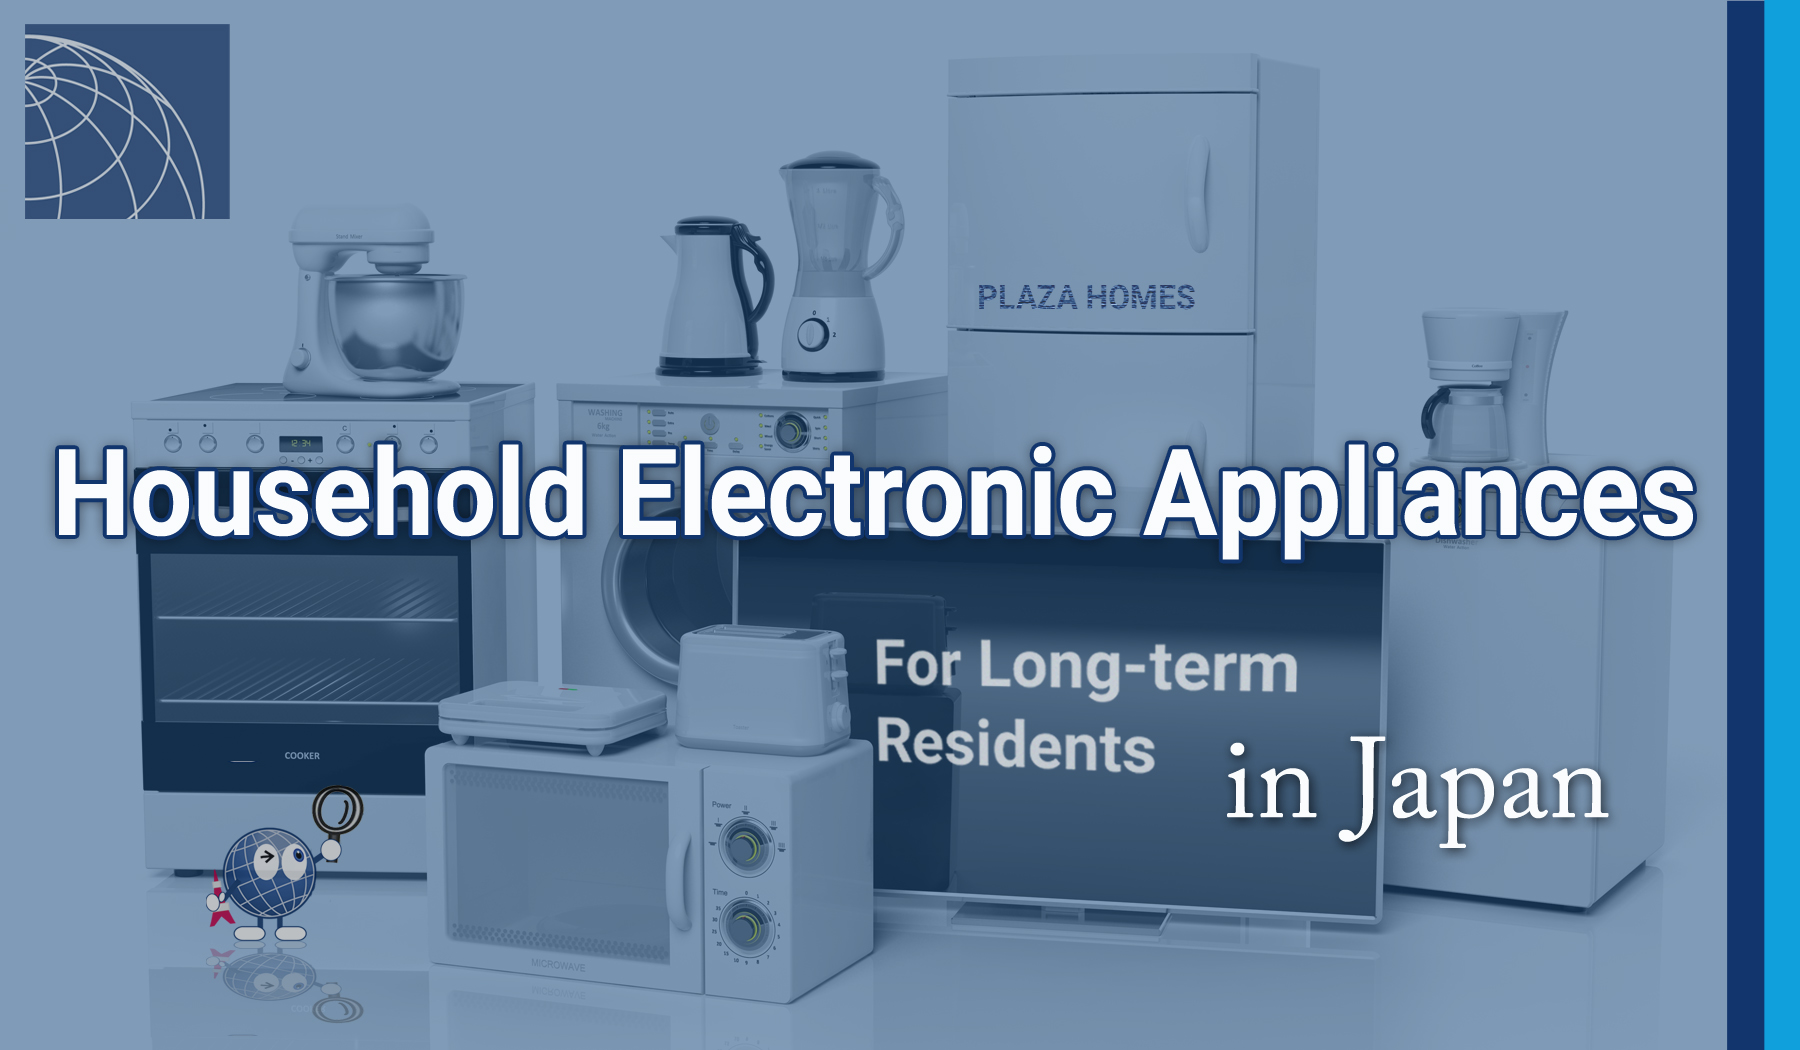 Household Electronic Appliances in Japan - For Long-term Residents - PLAZA  HOMES